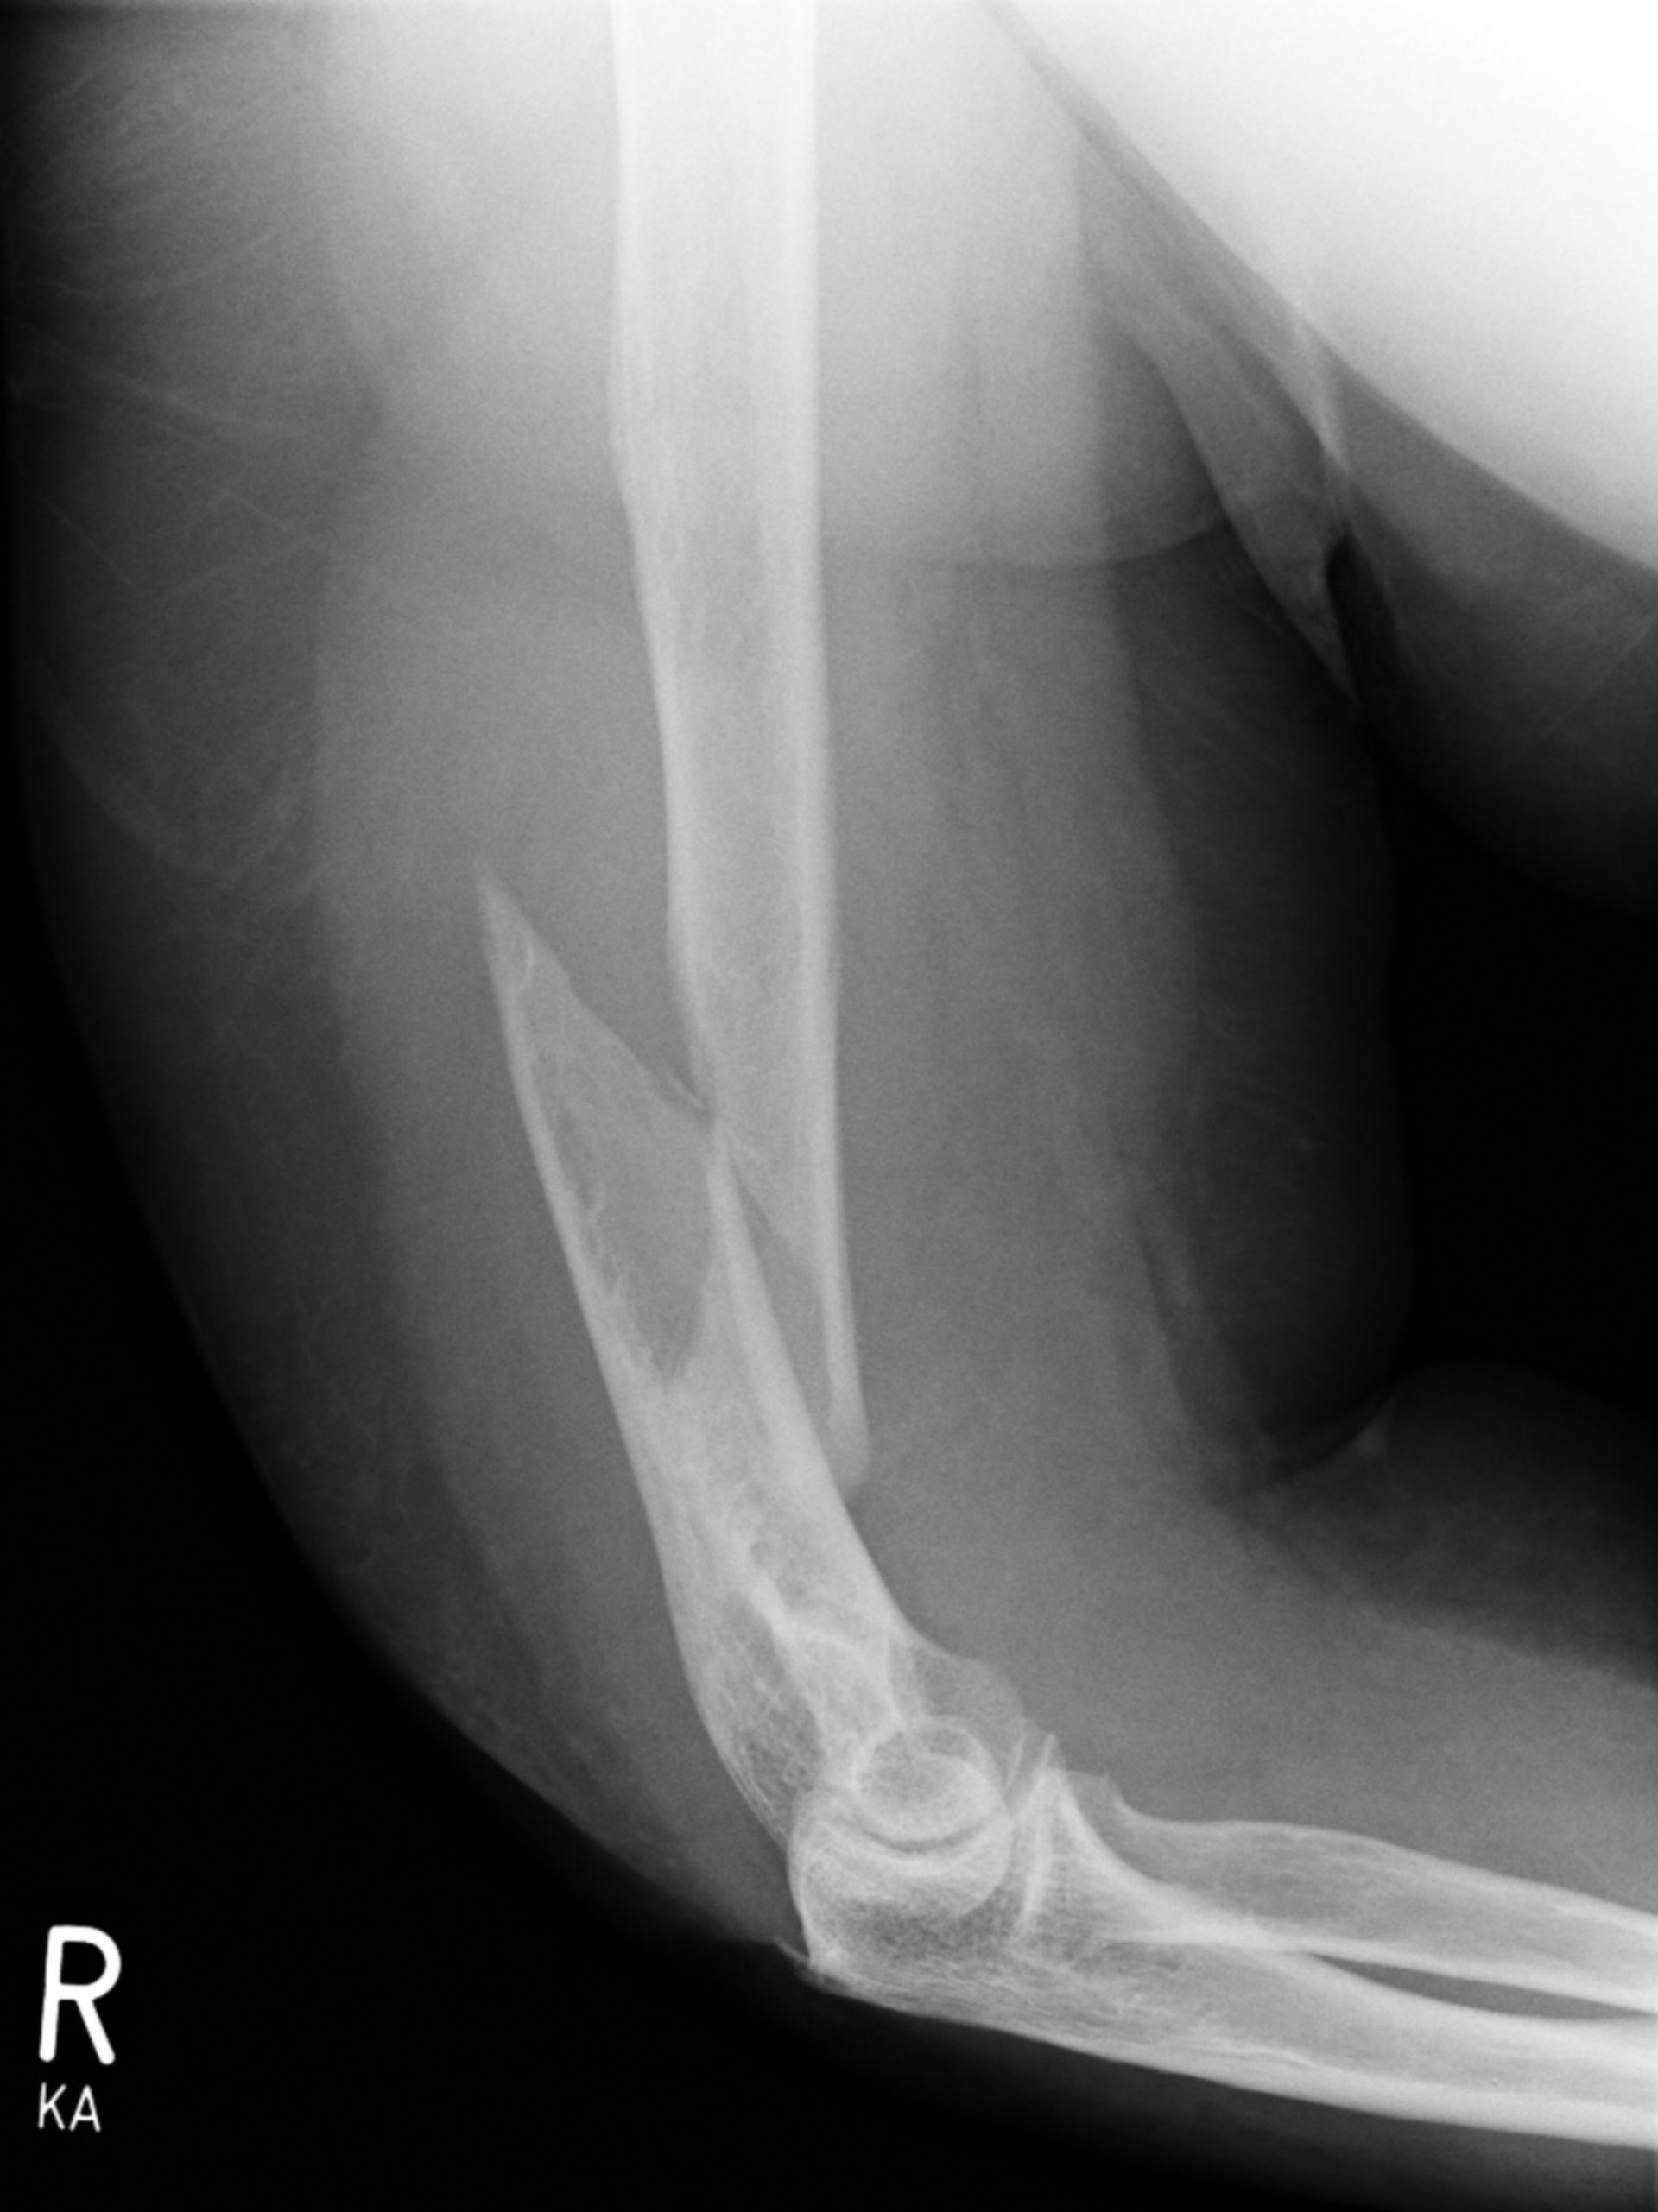 Supracondylar humerus fracture - lateral view